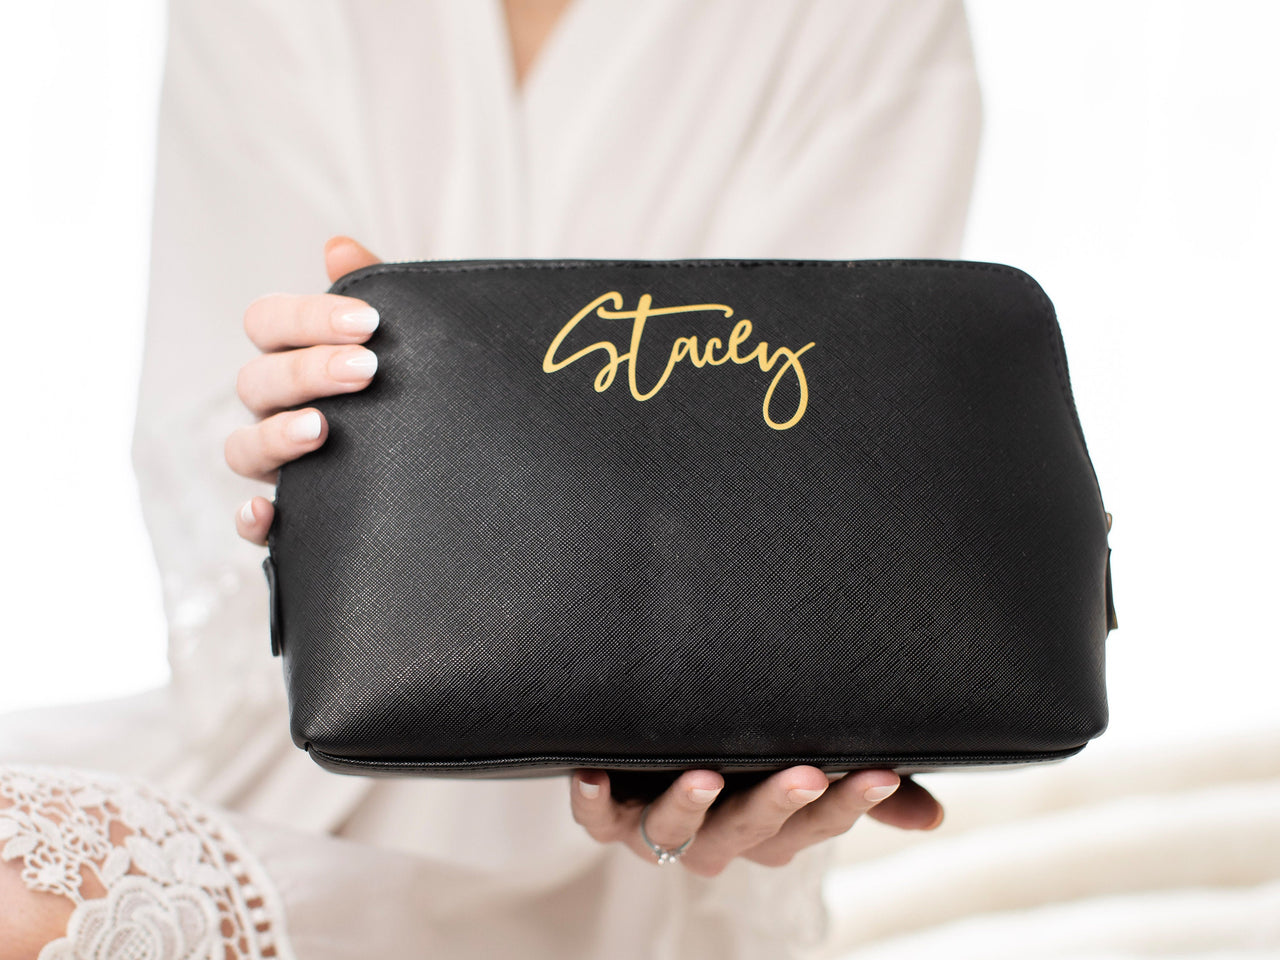 Personalized Signature Leather Cosmetic Bag